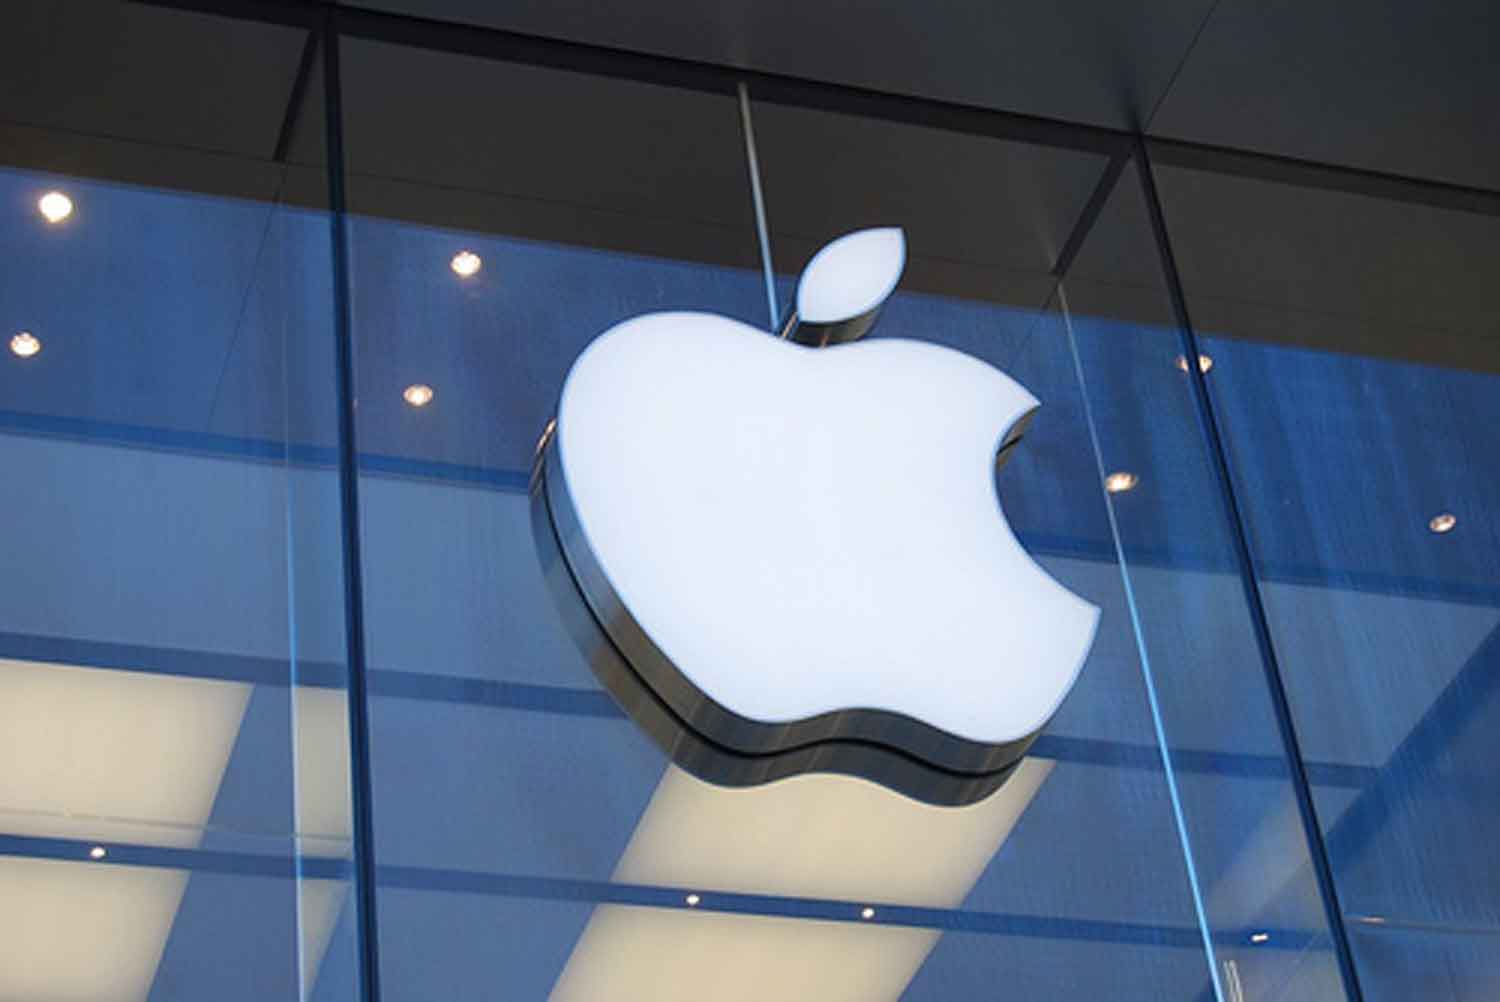 Apple to Close All Retail Stores Outside of China Until March 27th